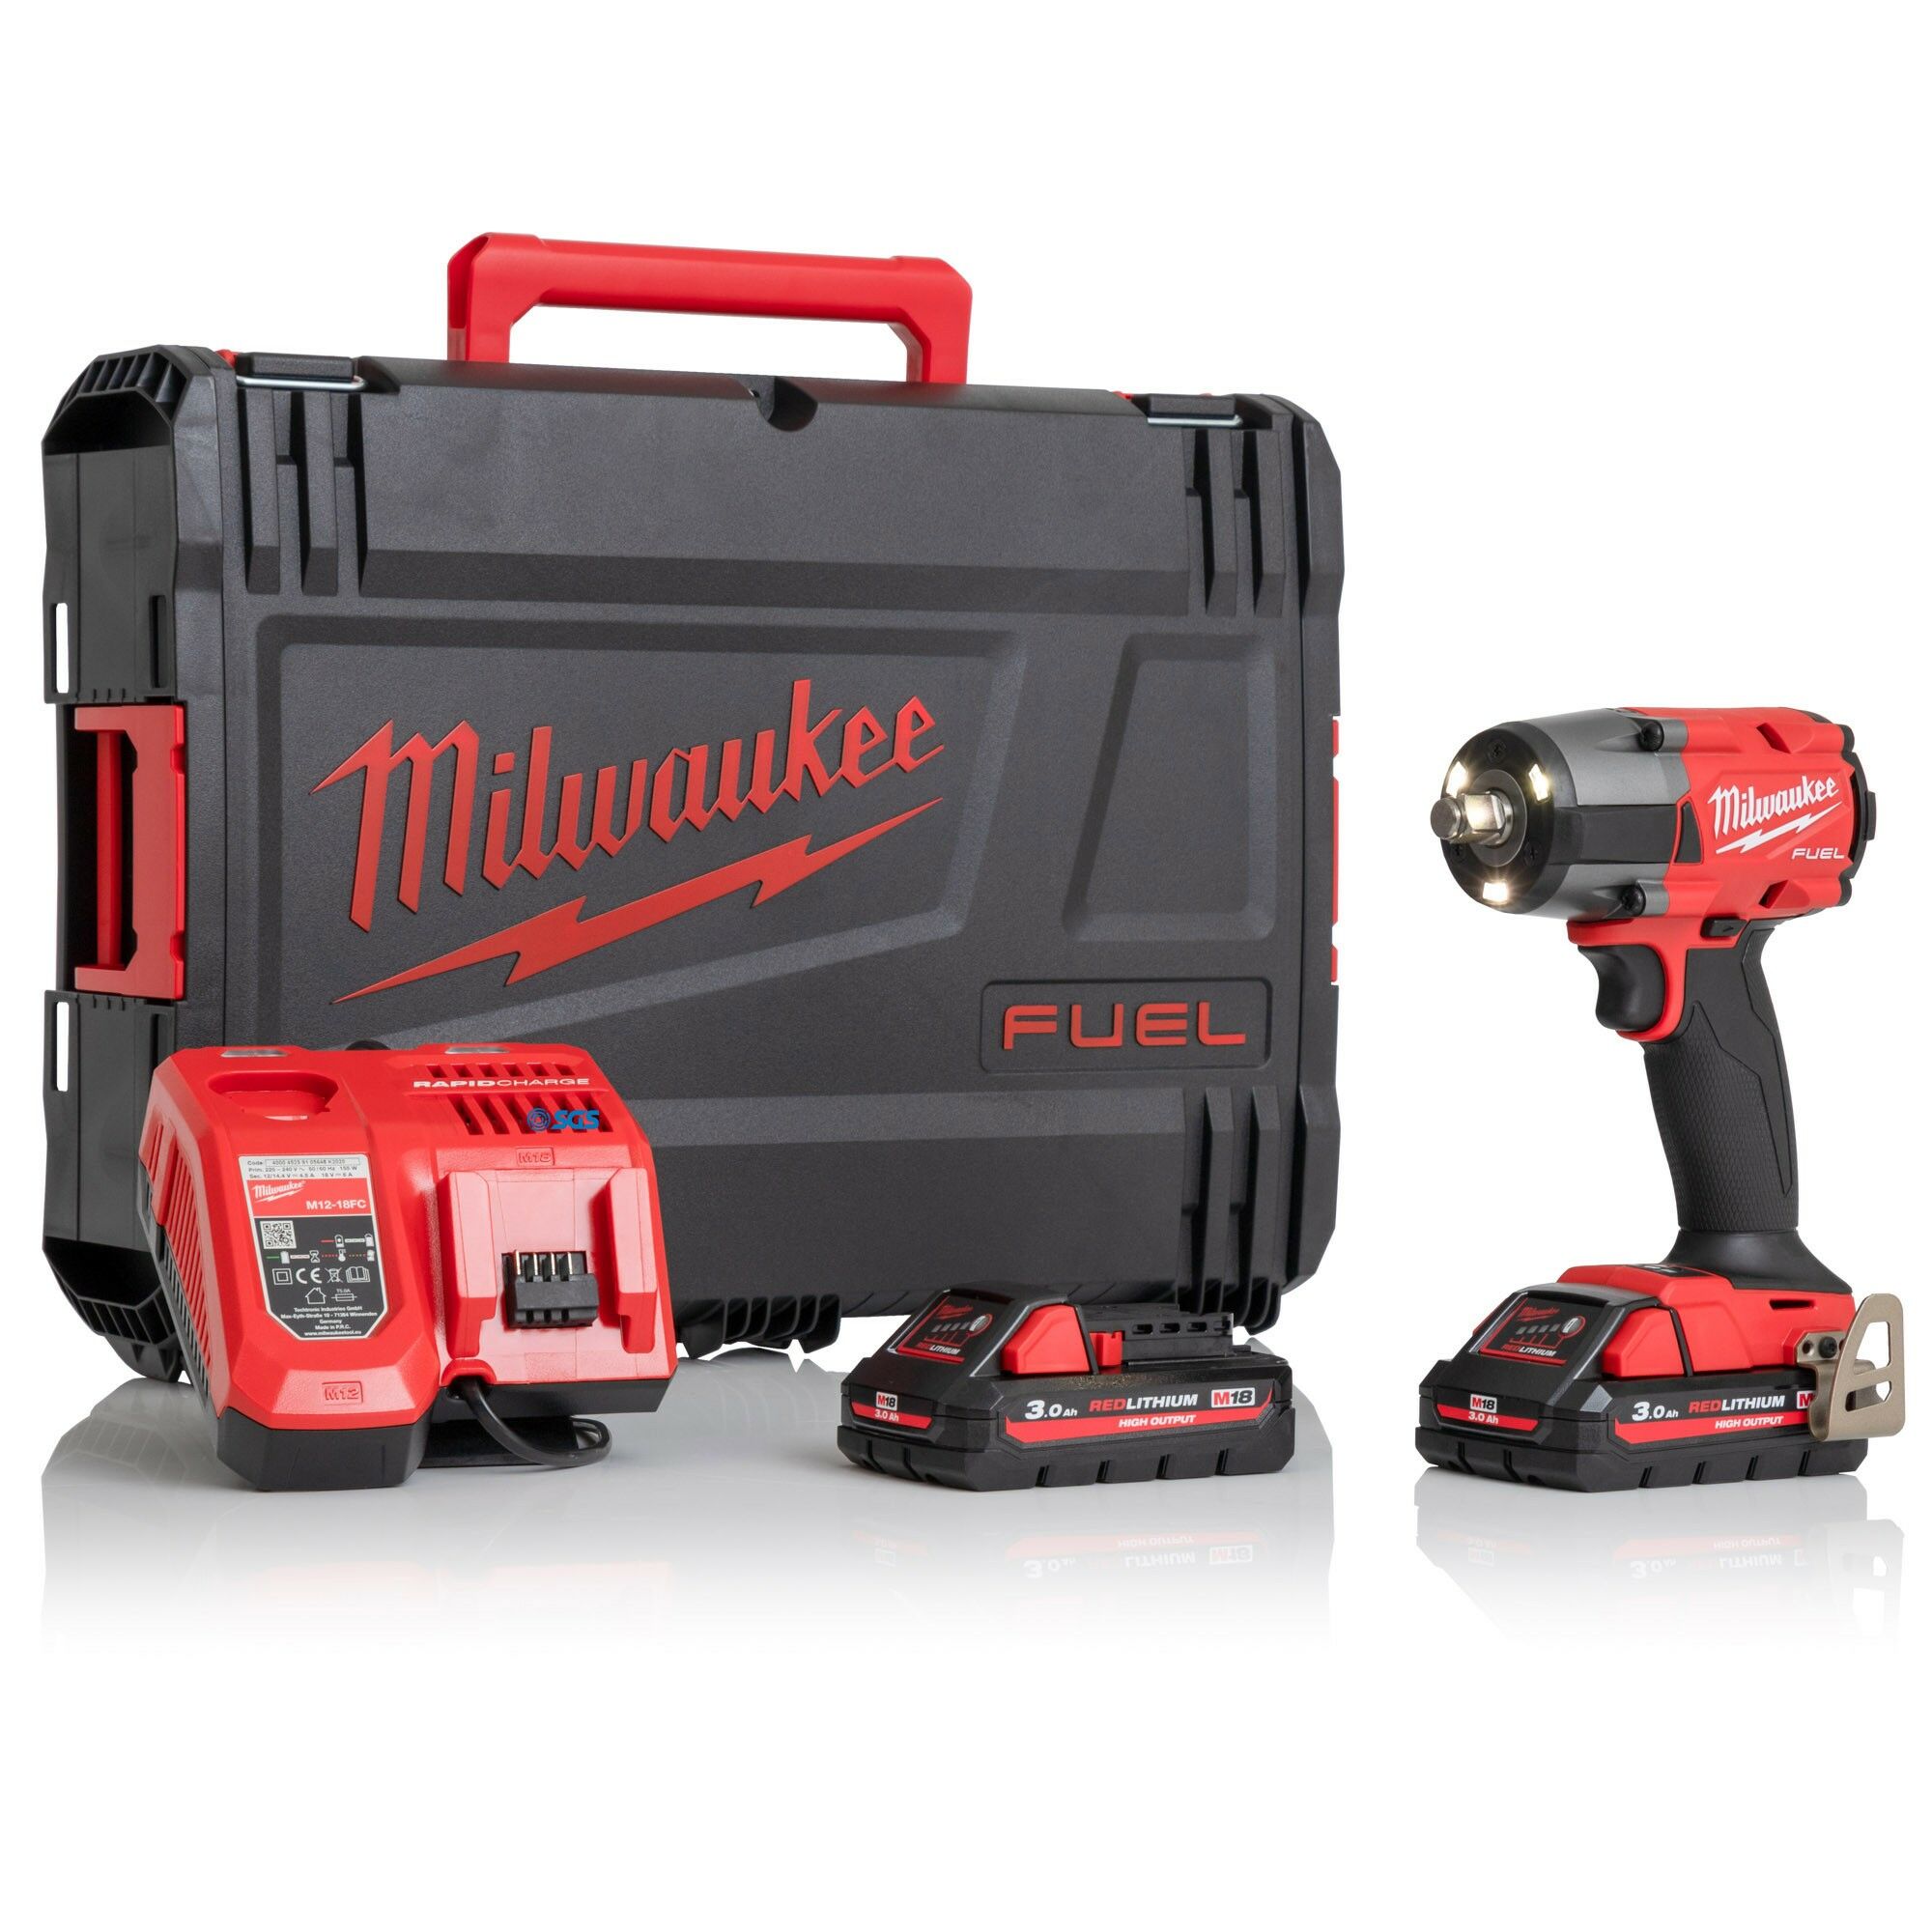 Milwaukee M18FMTIW2F12-302X M18 FUEL™ 18V 1/2" 881Nm Impact Wrench Kit - 2x 3Ah Batteries, Charger and Case